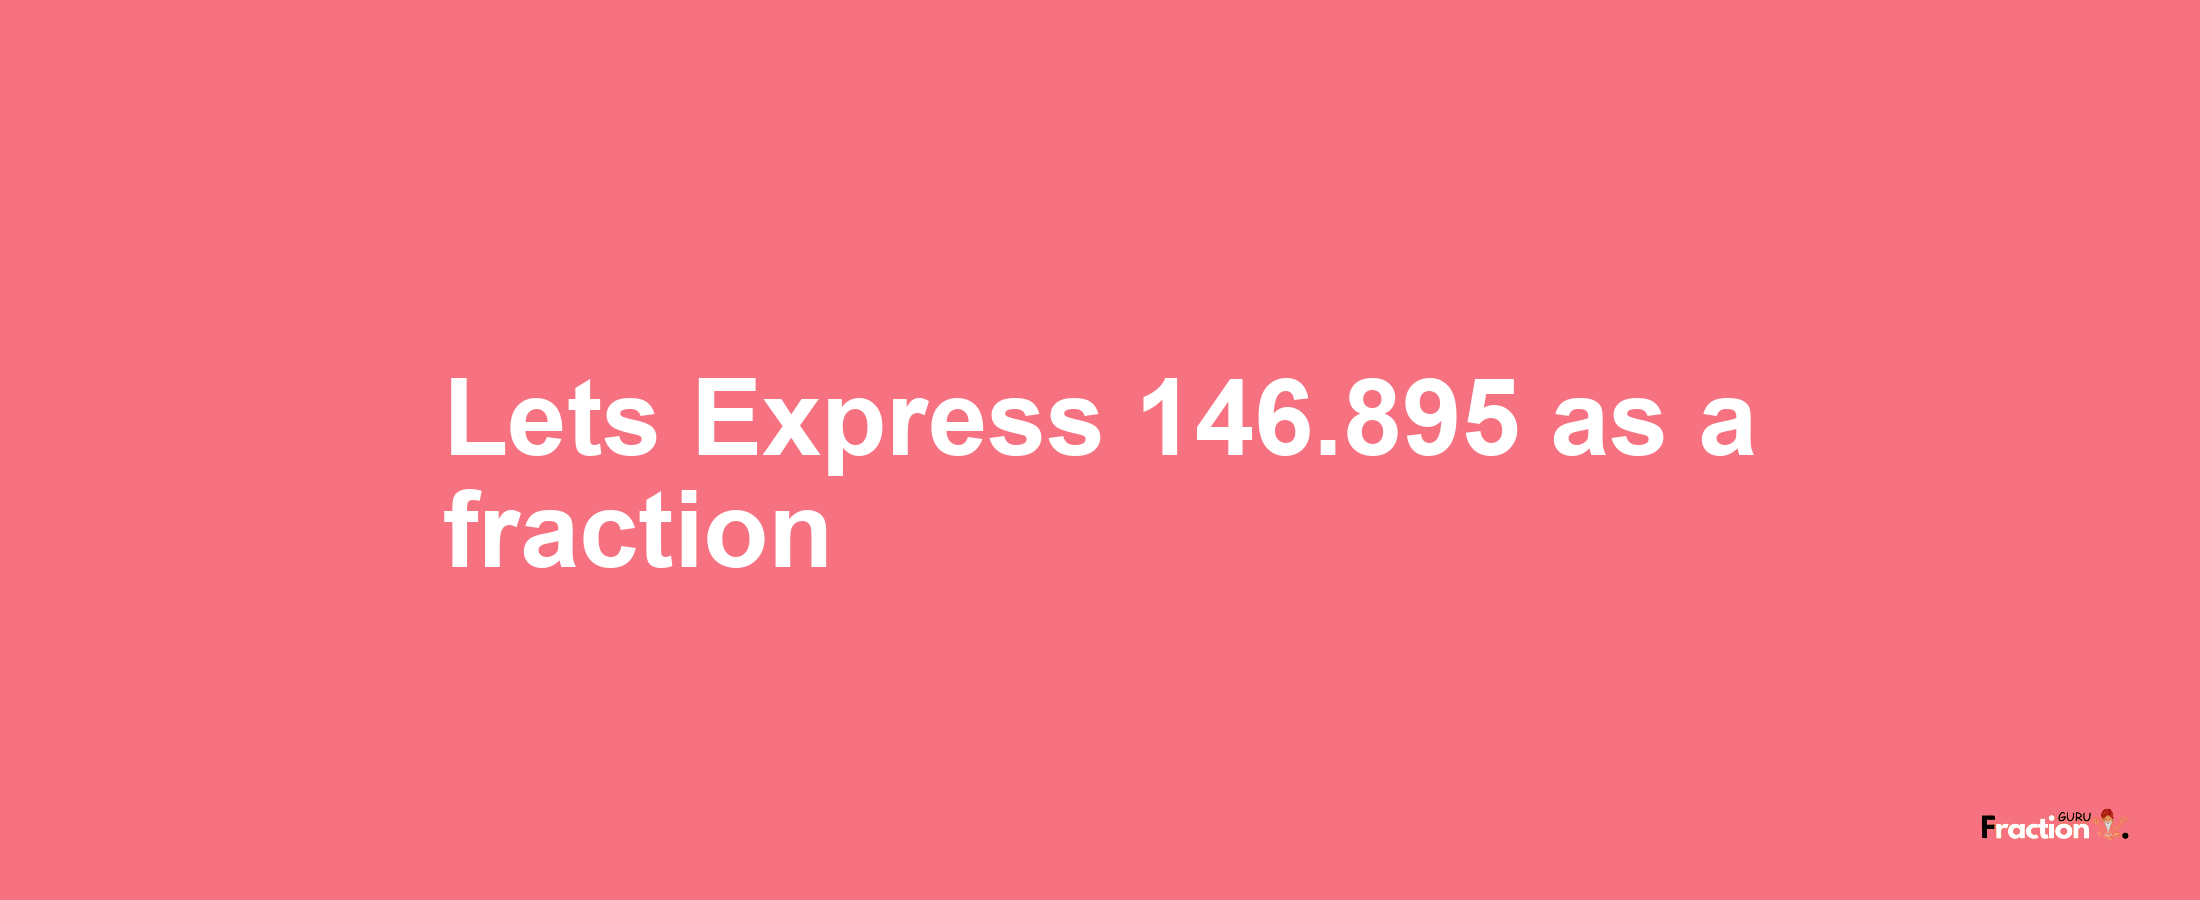 Lets Express 146.895 as afraction